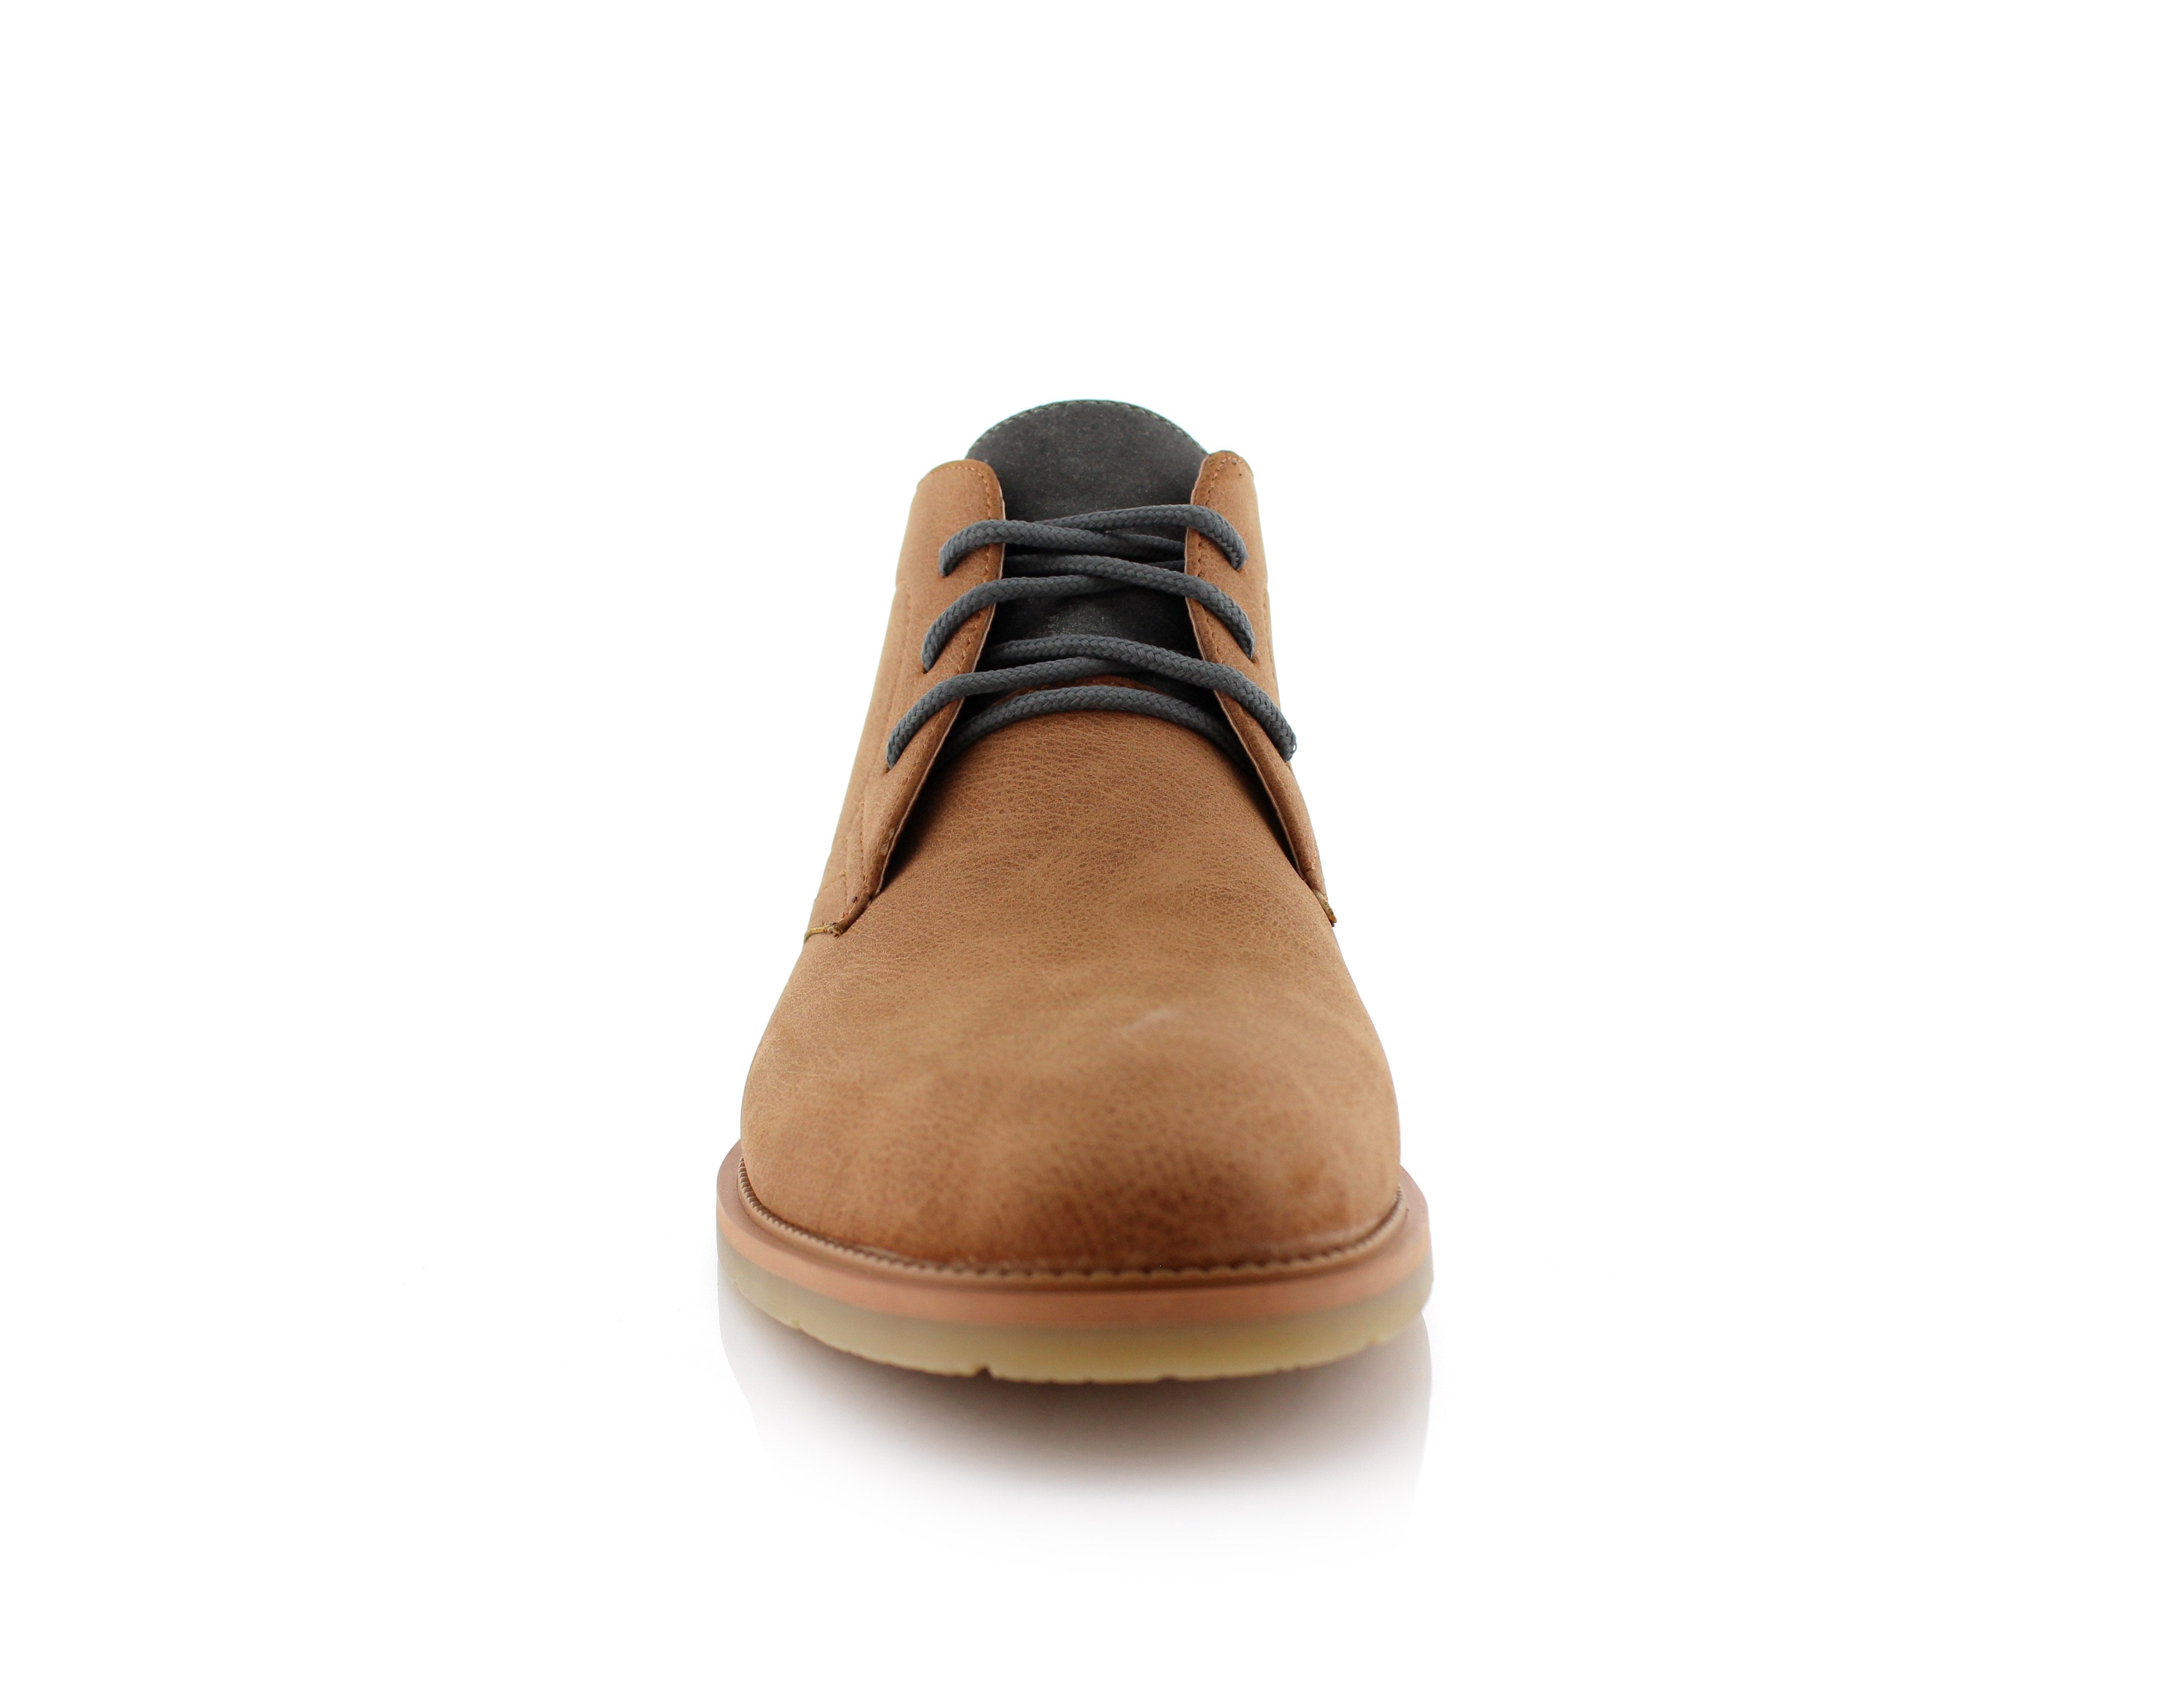 Two-Toned Chukka Boots | Marvin by Ferro Aldo | Conal Footwear | Front Angle View